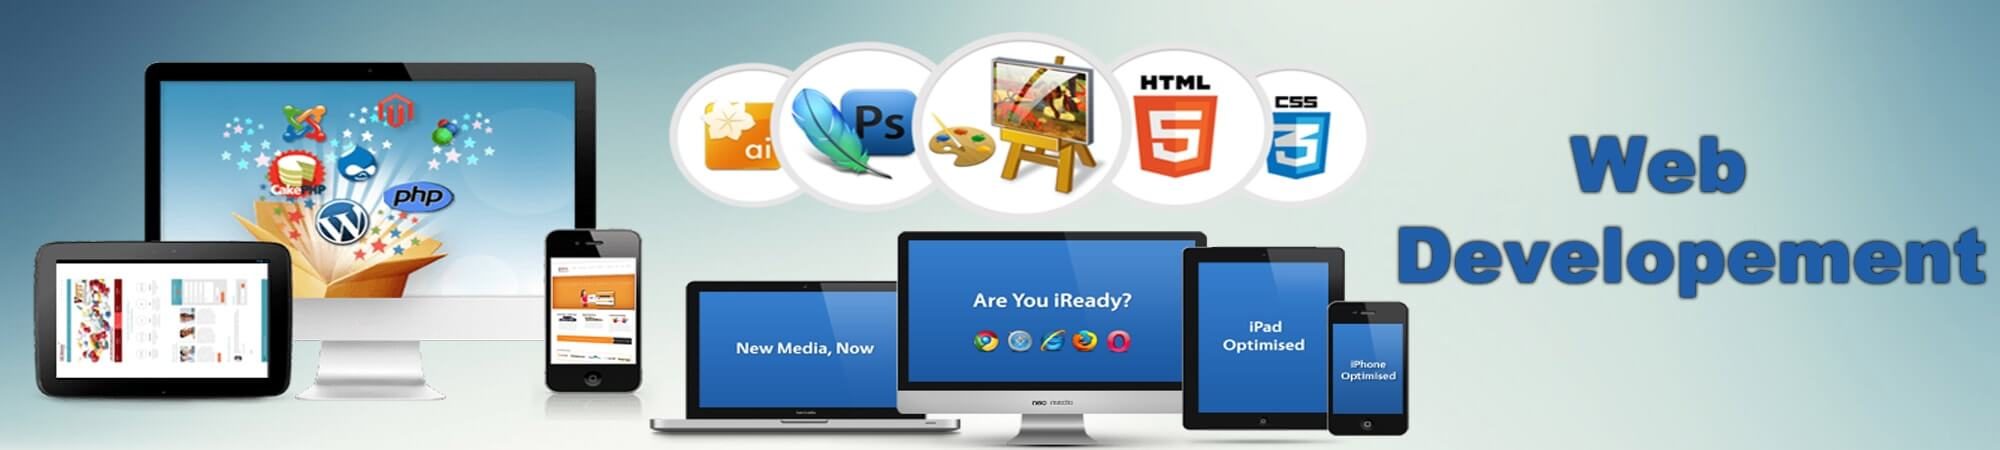 Make Wonderful Web Appearance With Our Services